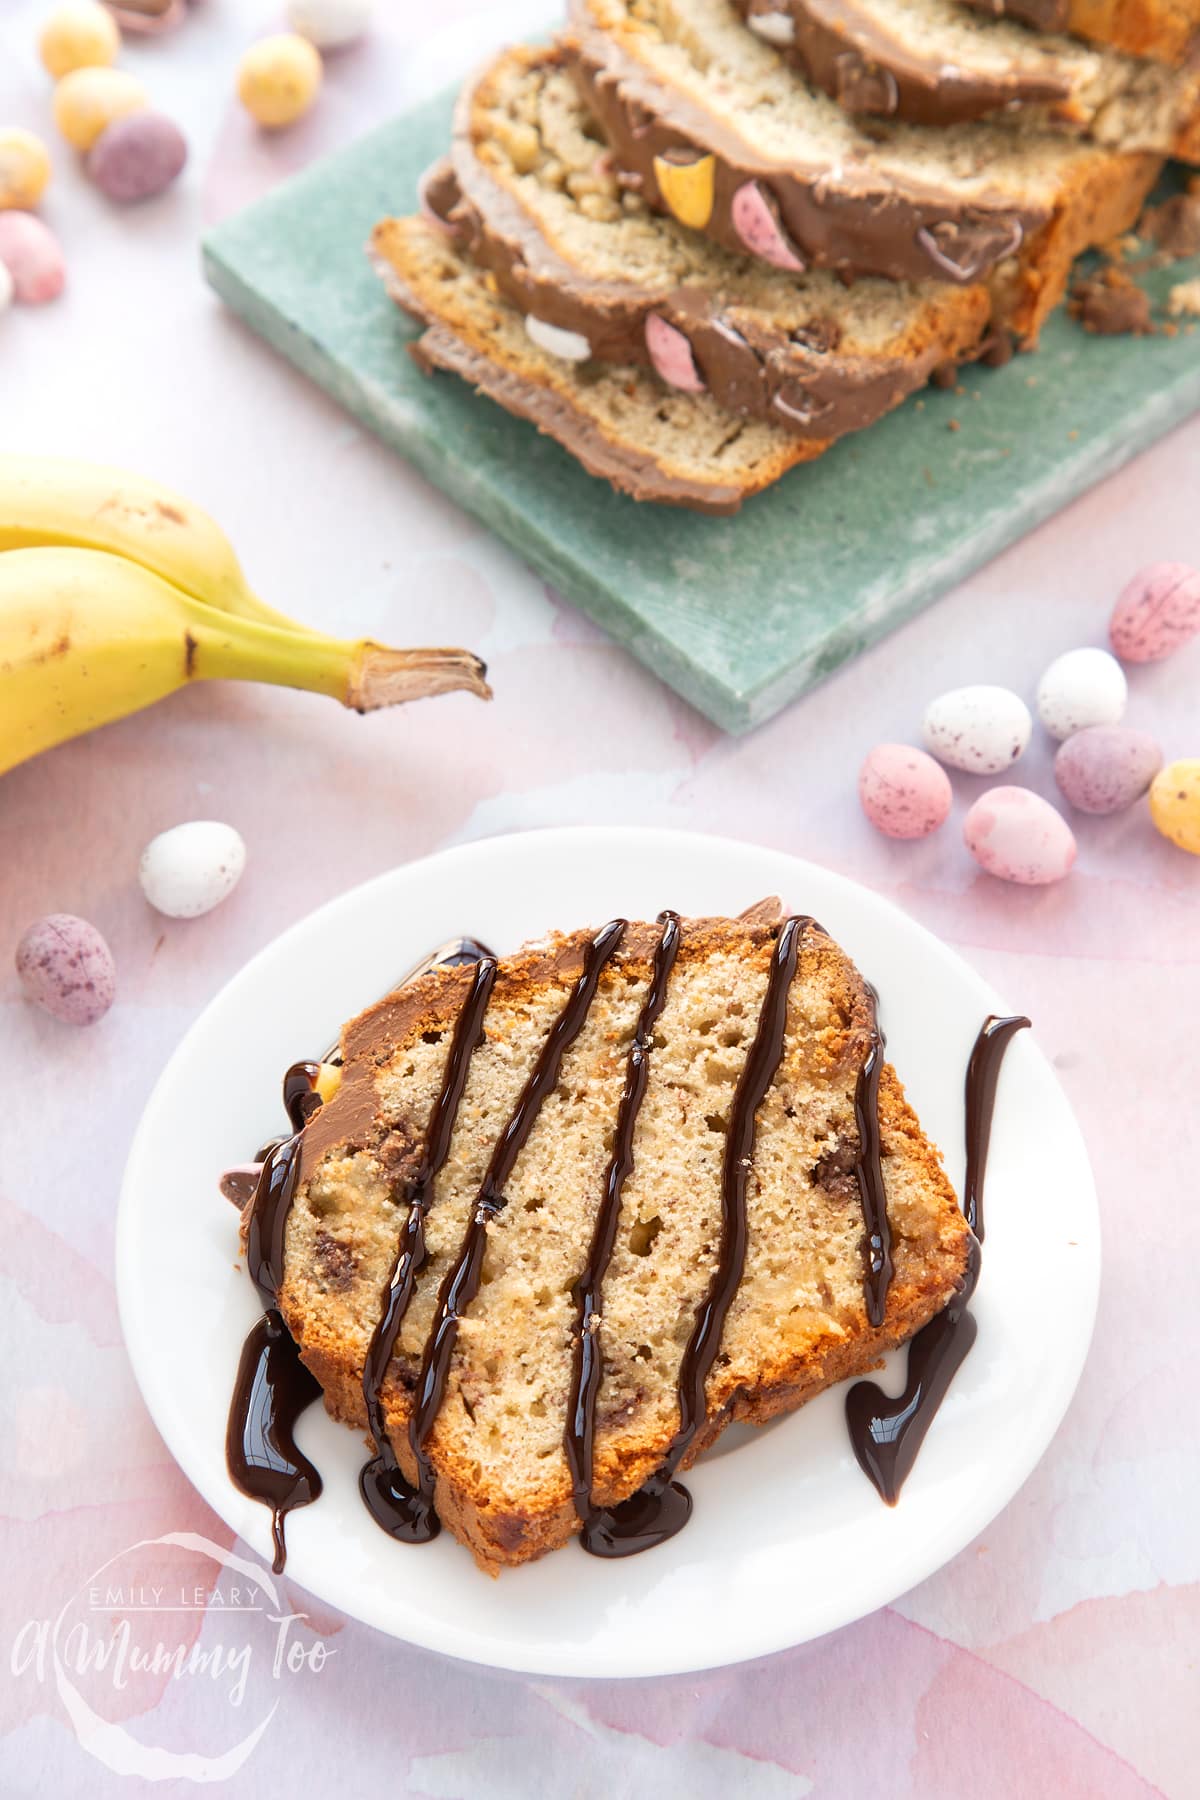 A slice of Easter banana bread on a white plate. The slice is drizzled with chocolate sauce.